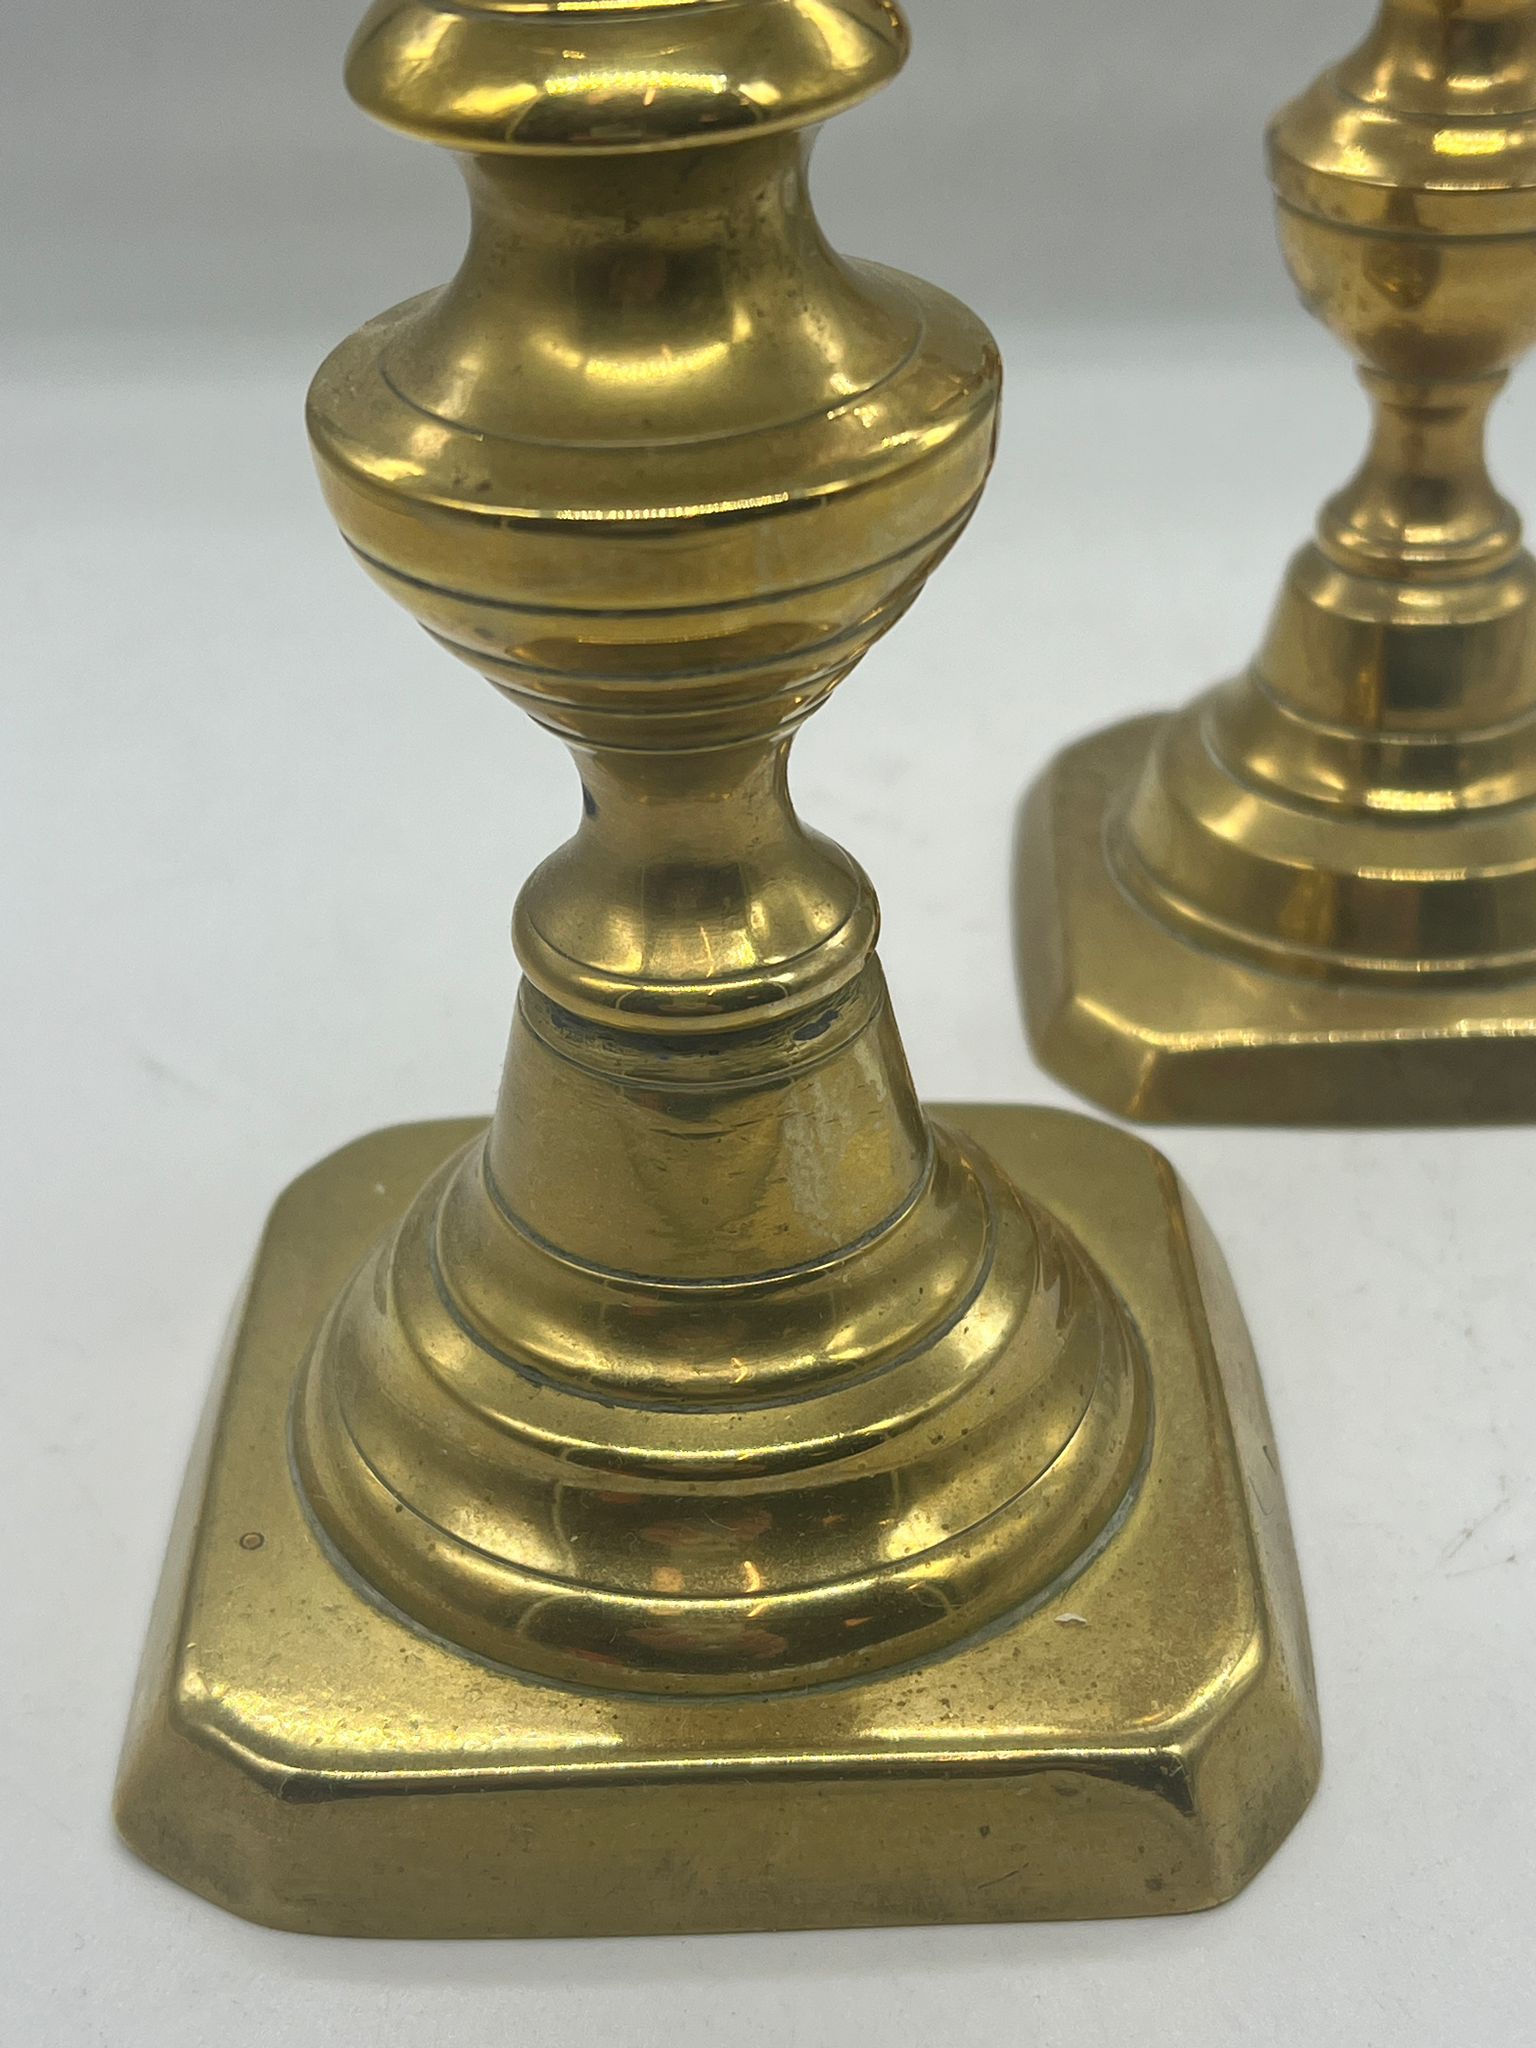 A pair of brass candlesticks with glass finials - Image 3 of 3